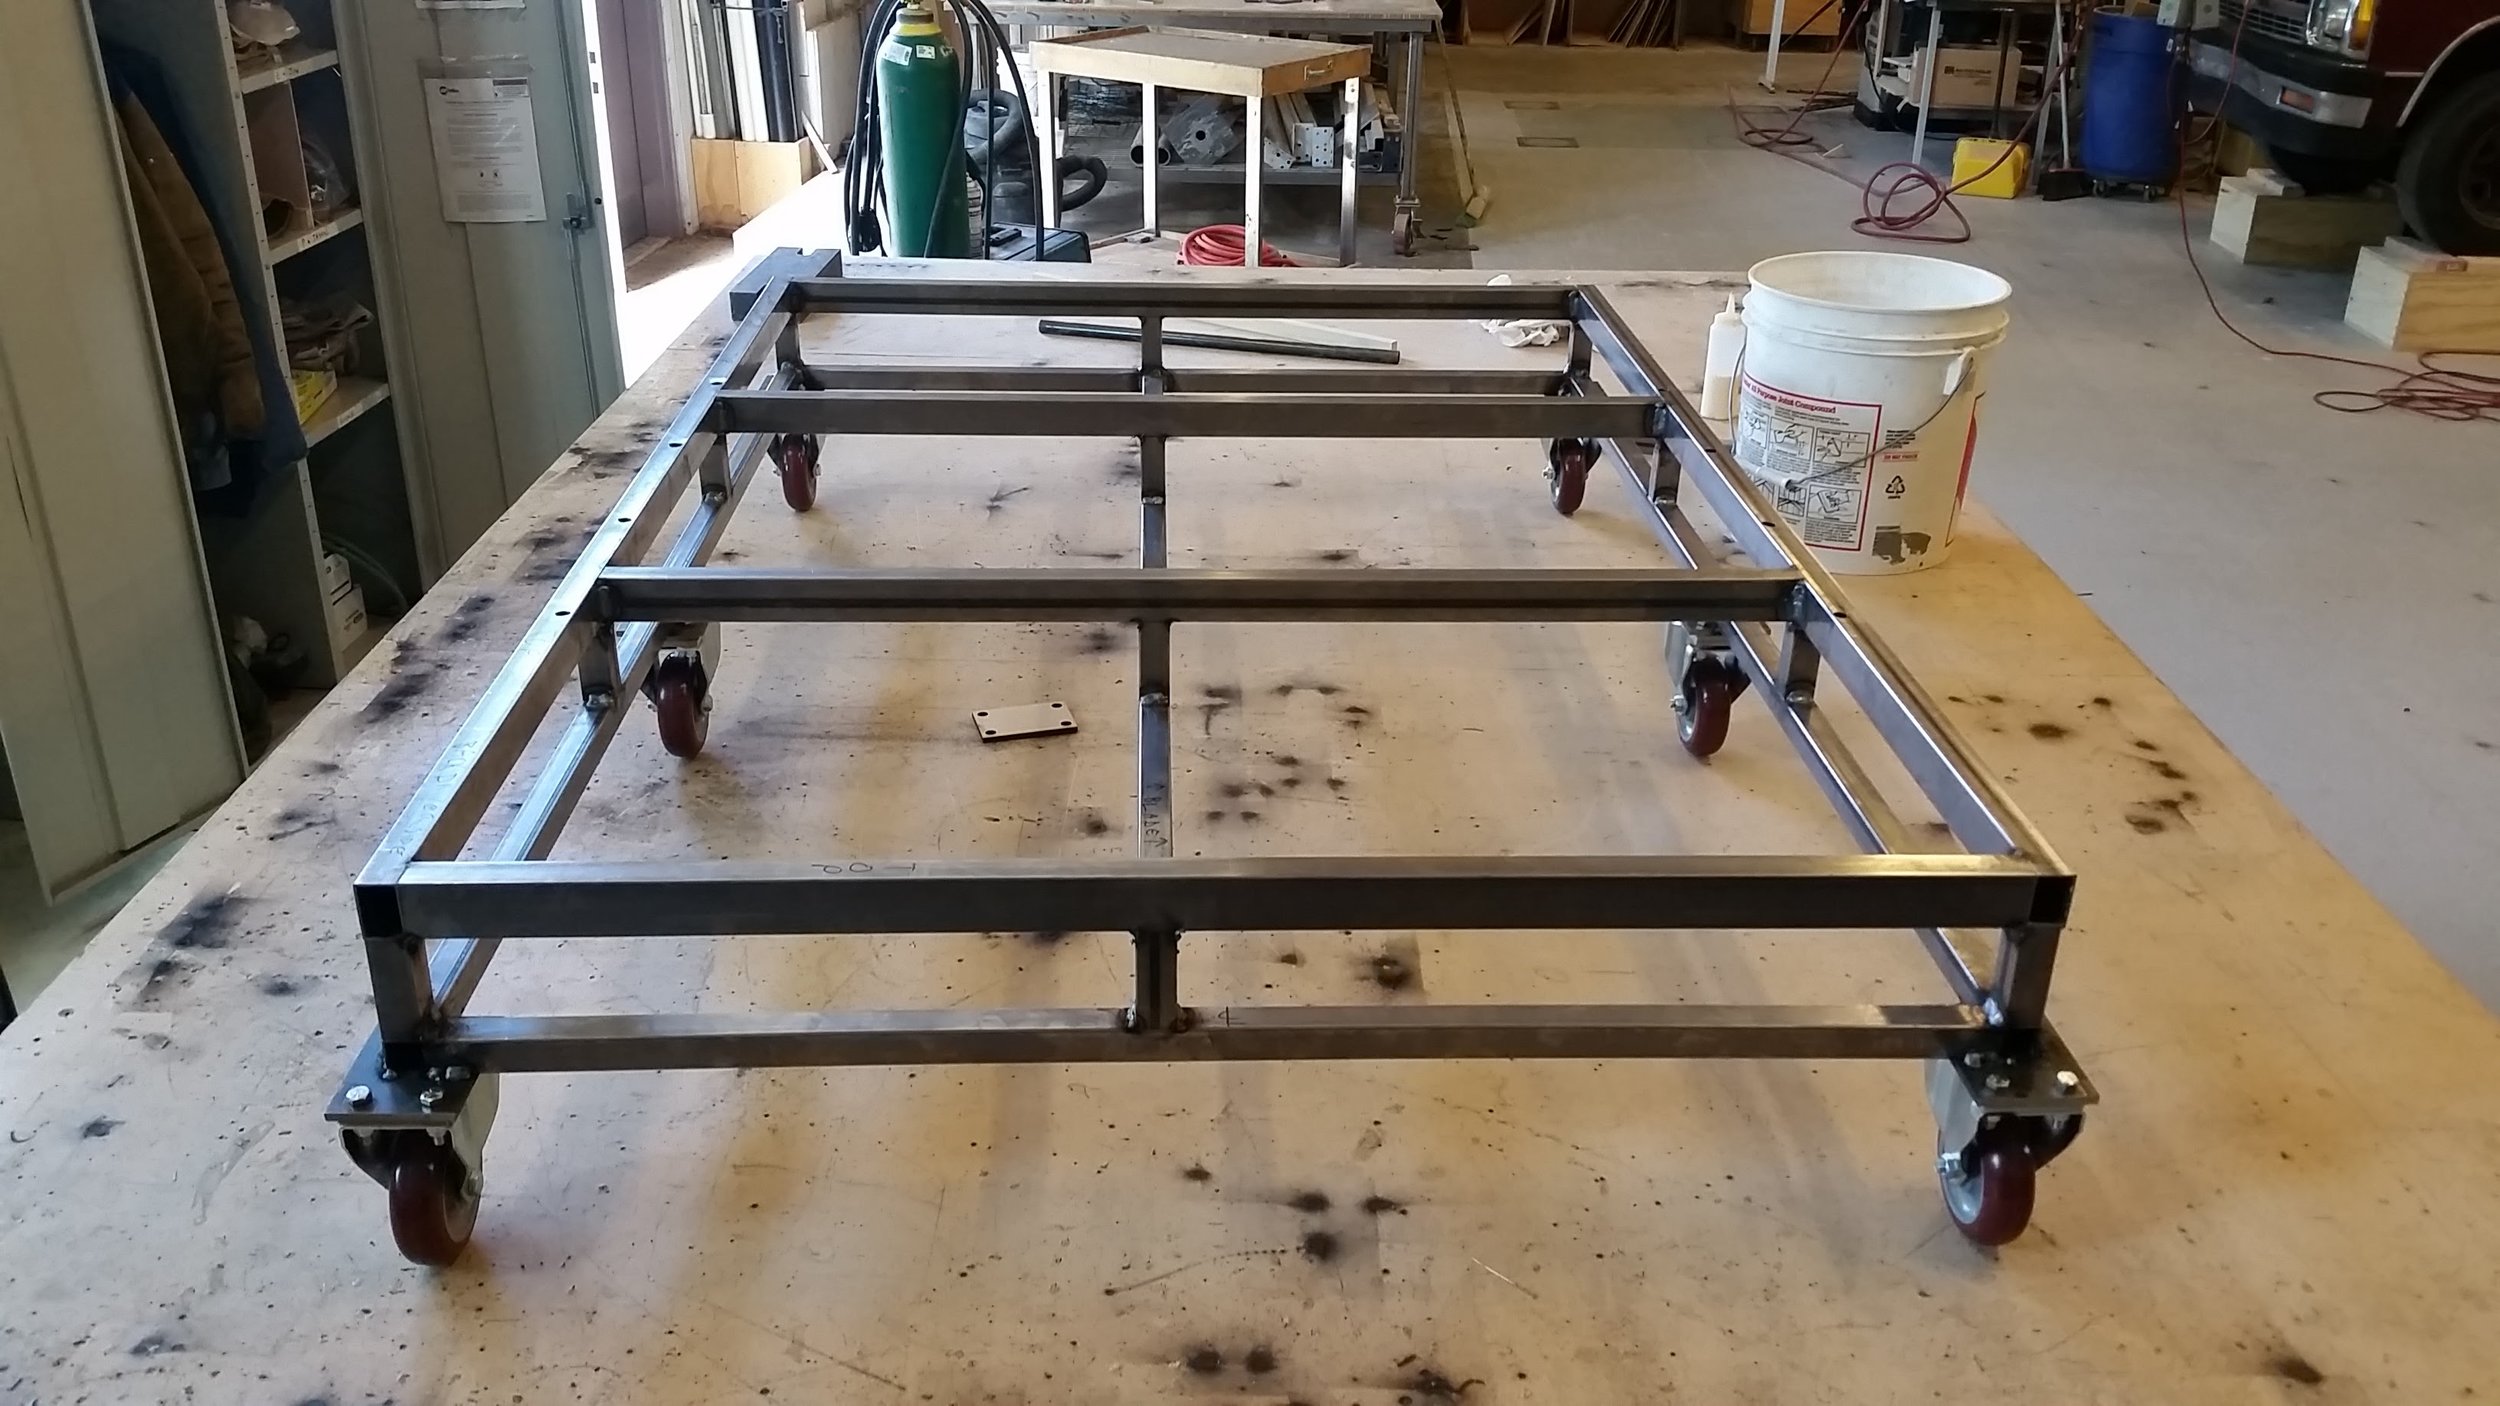  Truck carriage frame, before extra casters were added. 